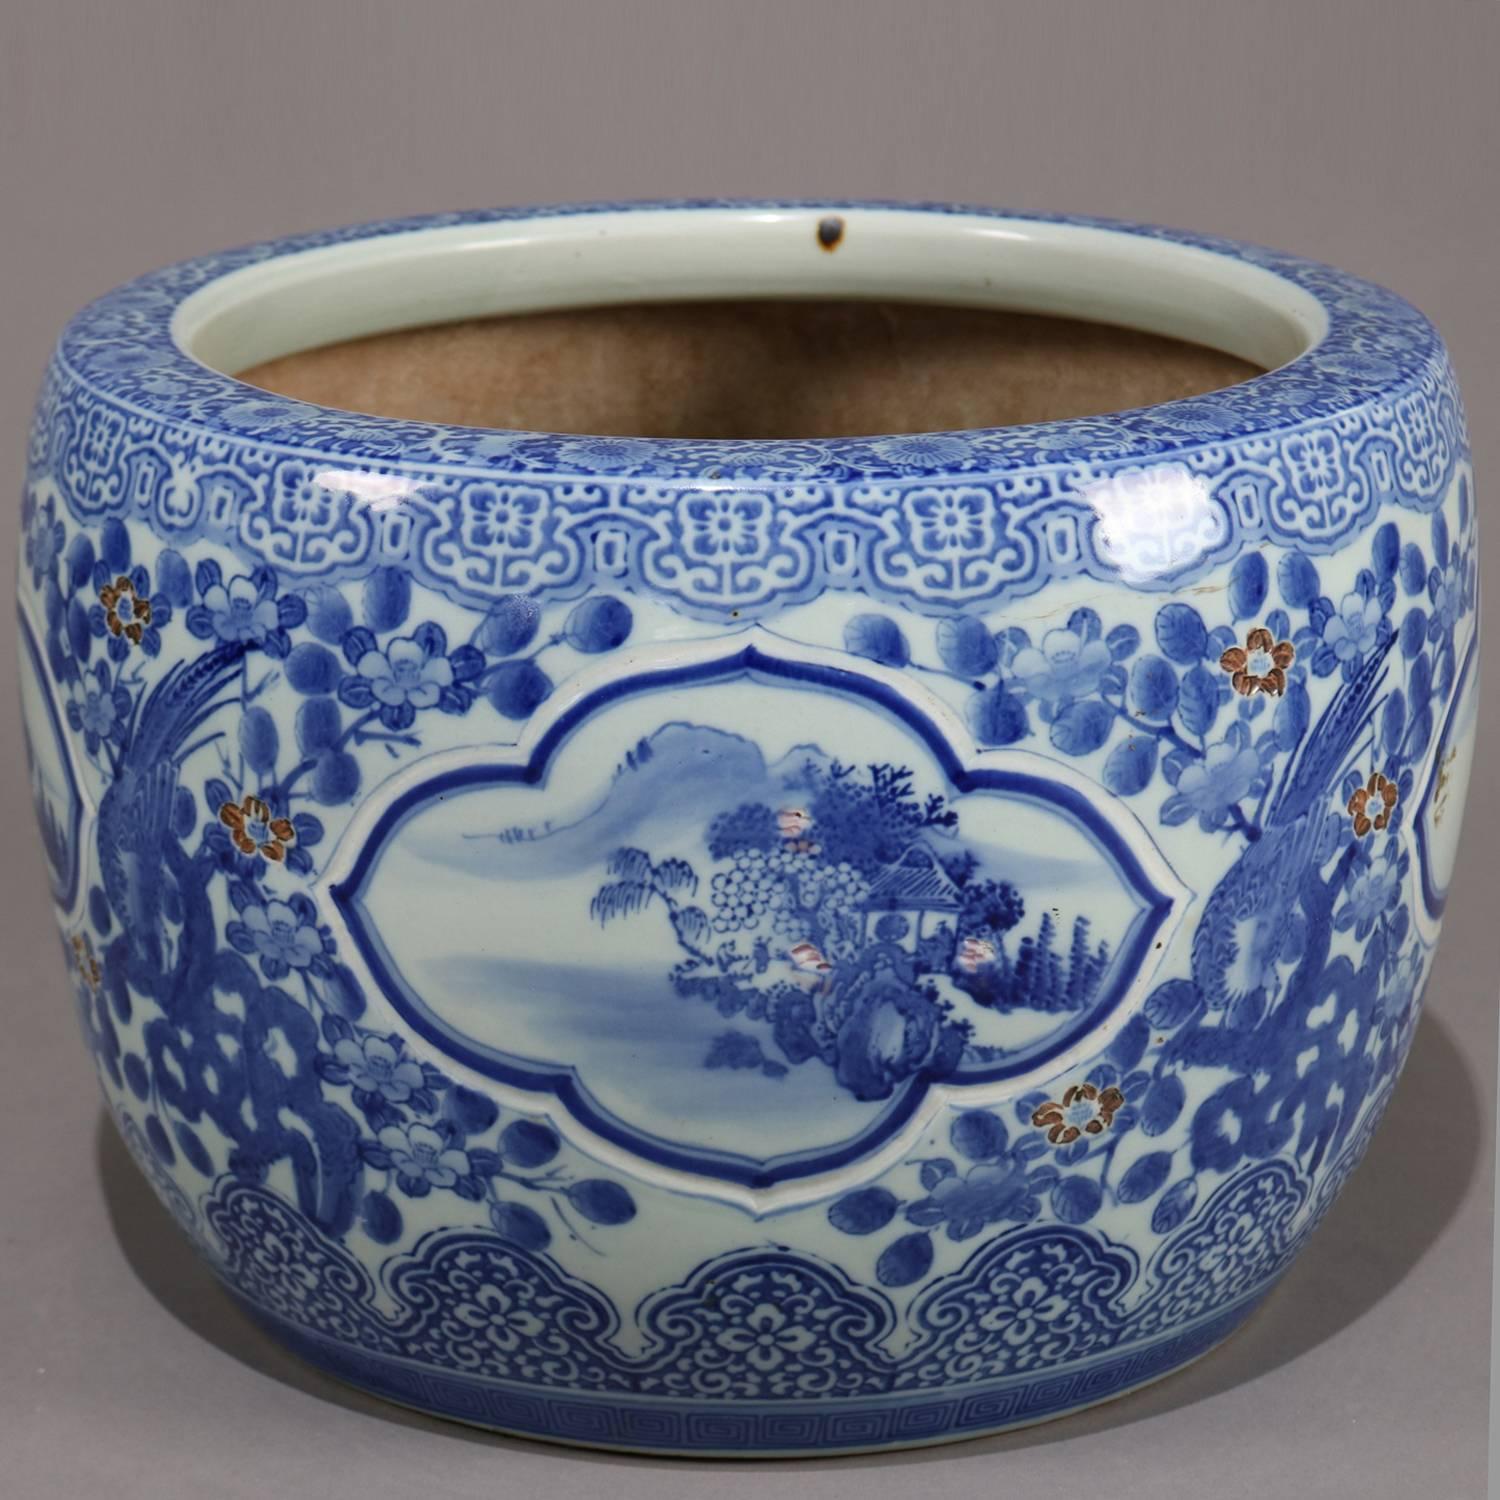 Chinese hand-painted blue and white fish bowl jardinière features reserves of landscape scenes among overall decoration foliate with Fenghuang phoenix, borders of repeating floral and scroll patterning, 20th century

Measures: 13.75